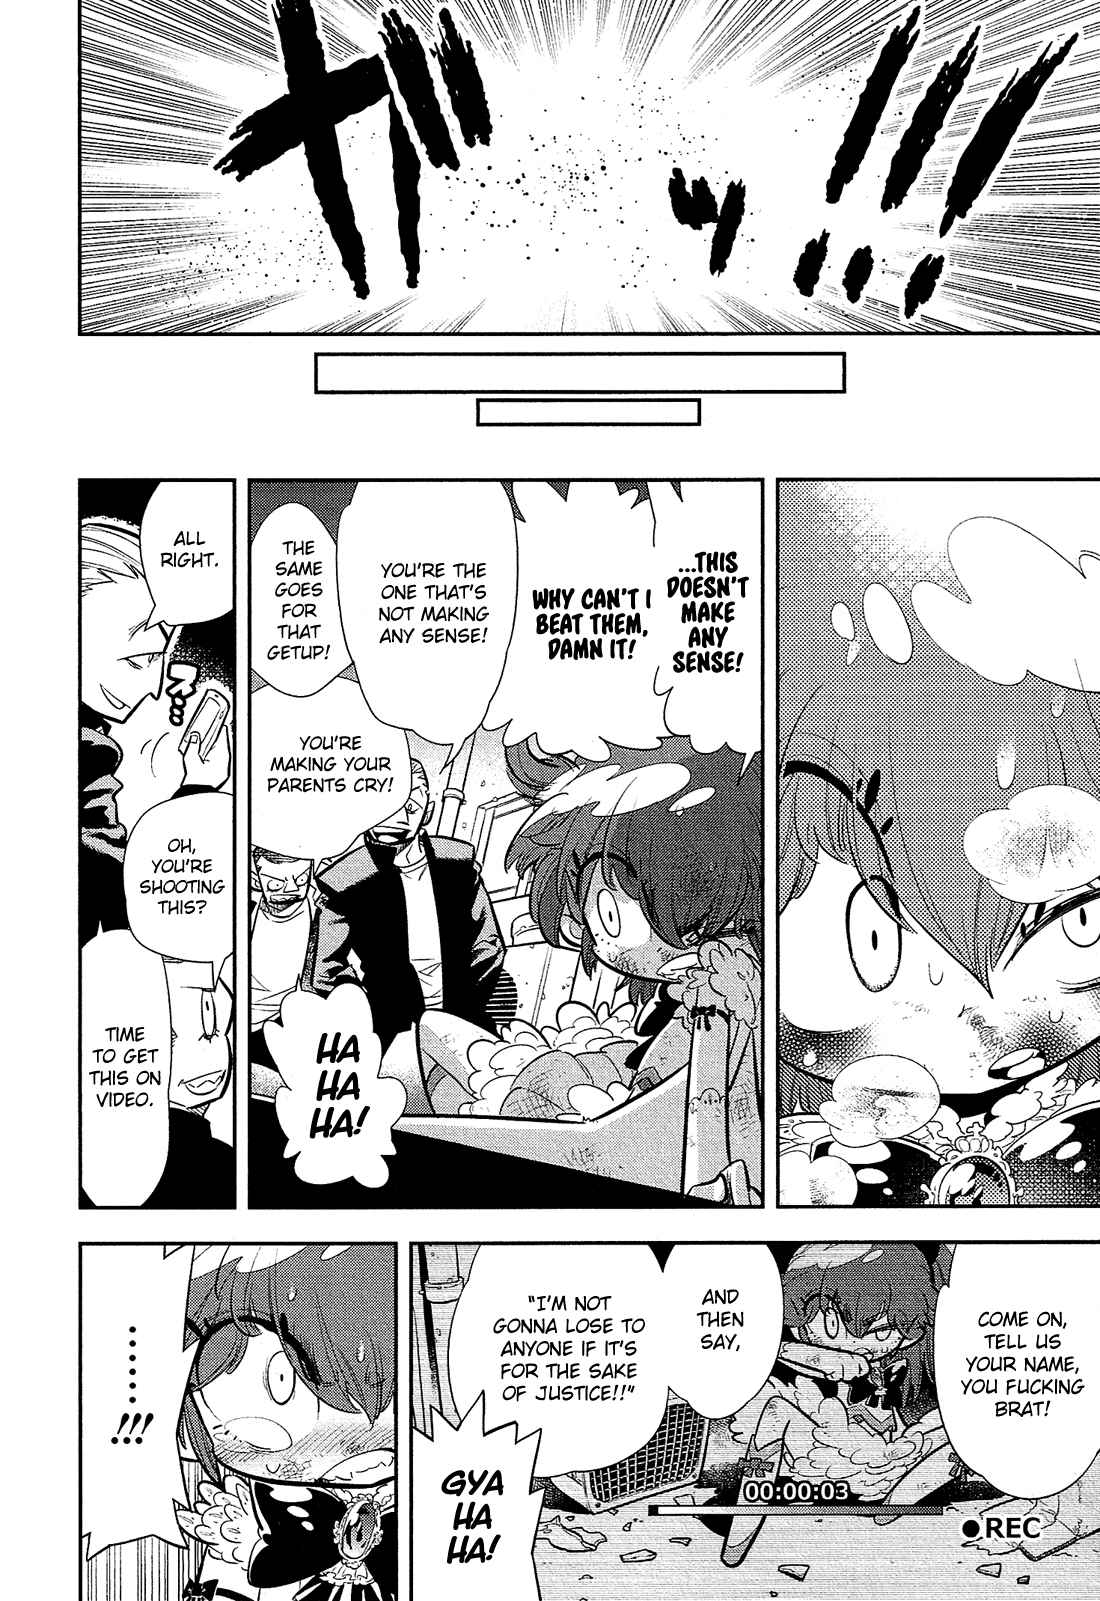 Bokura wa Mahou Shounen Vol. 1 Ch. 1 To Hell With Being a Magical Boy! I'm Definitely Gonna Quit!